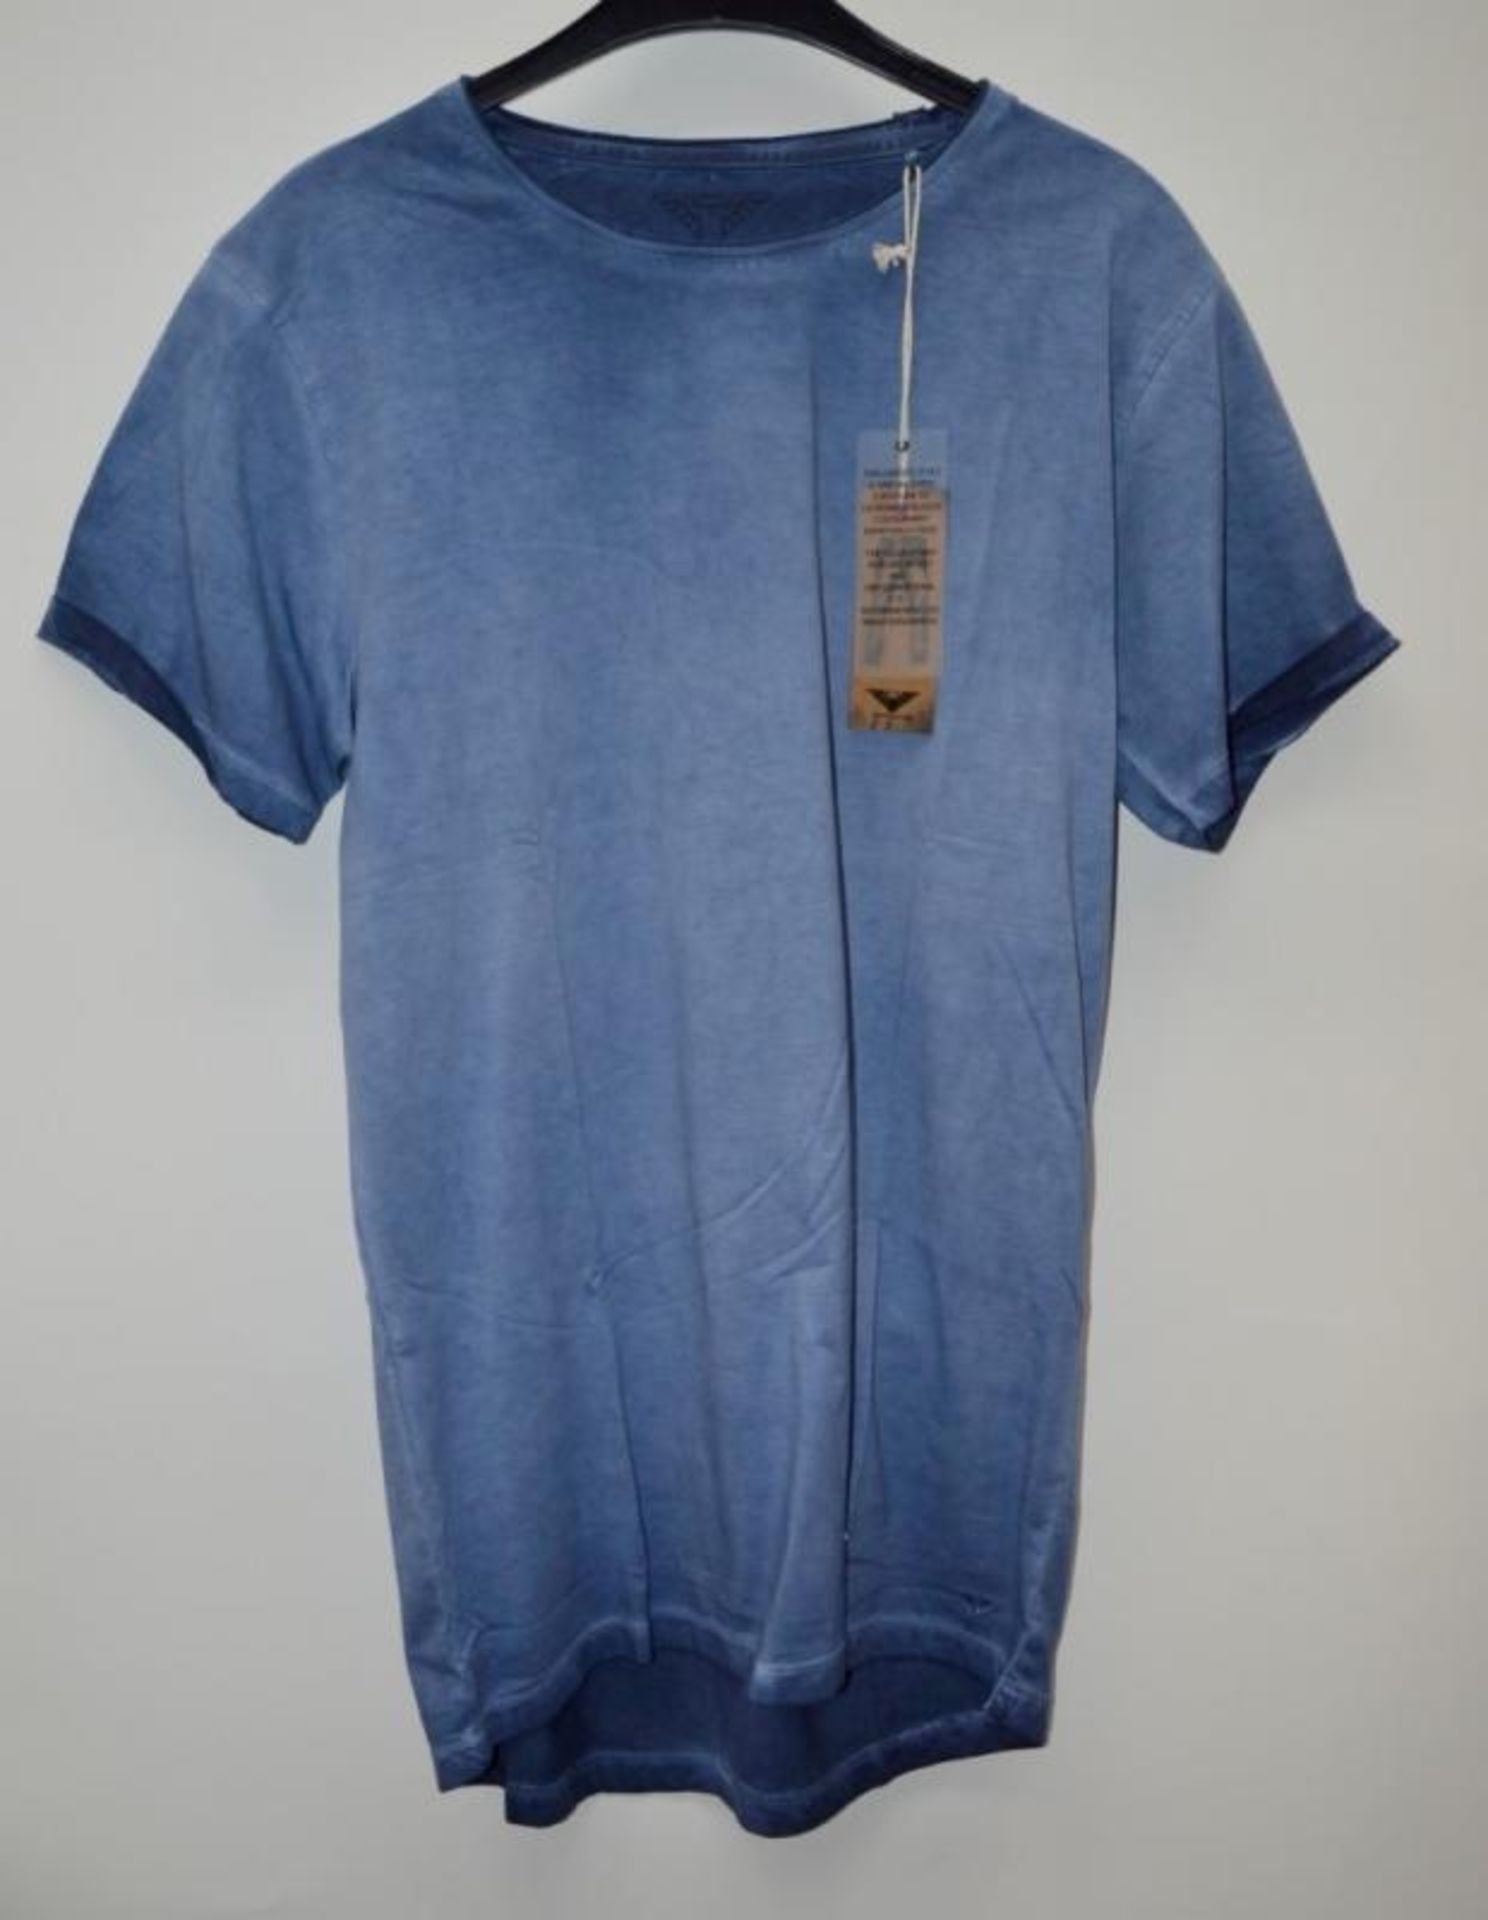 5 x Assorted PRE END / GNIOUS Branded Mens T-Shirts - New Stock With Tags - Recent Retail - Image 6 of 7